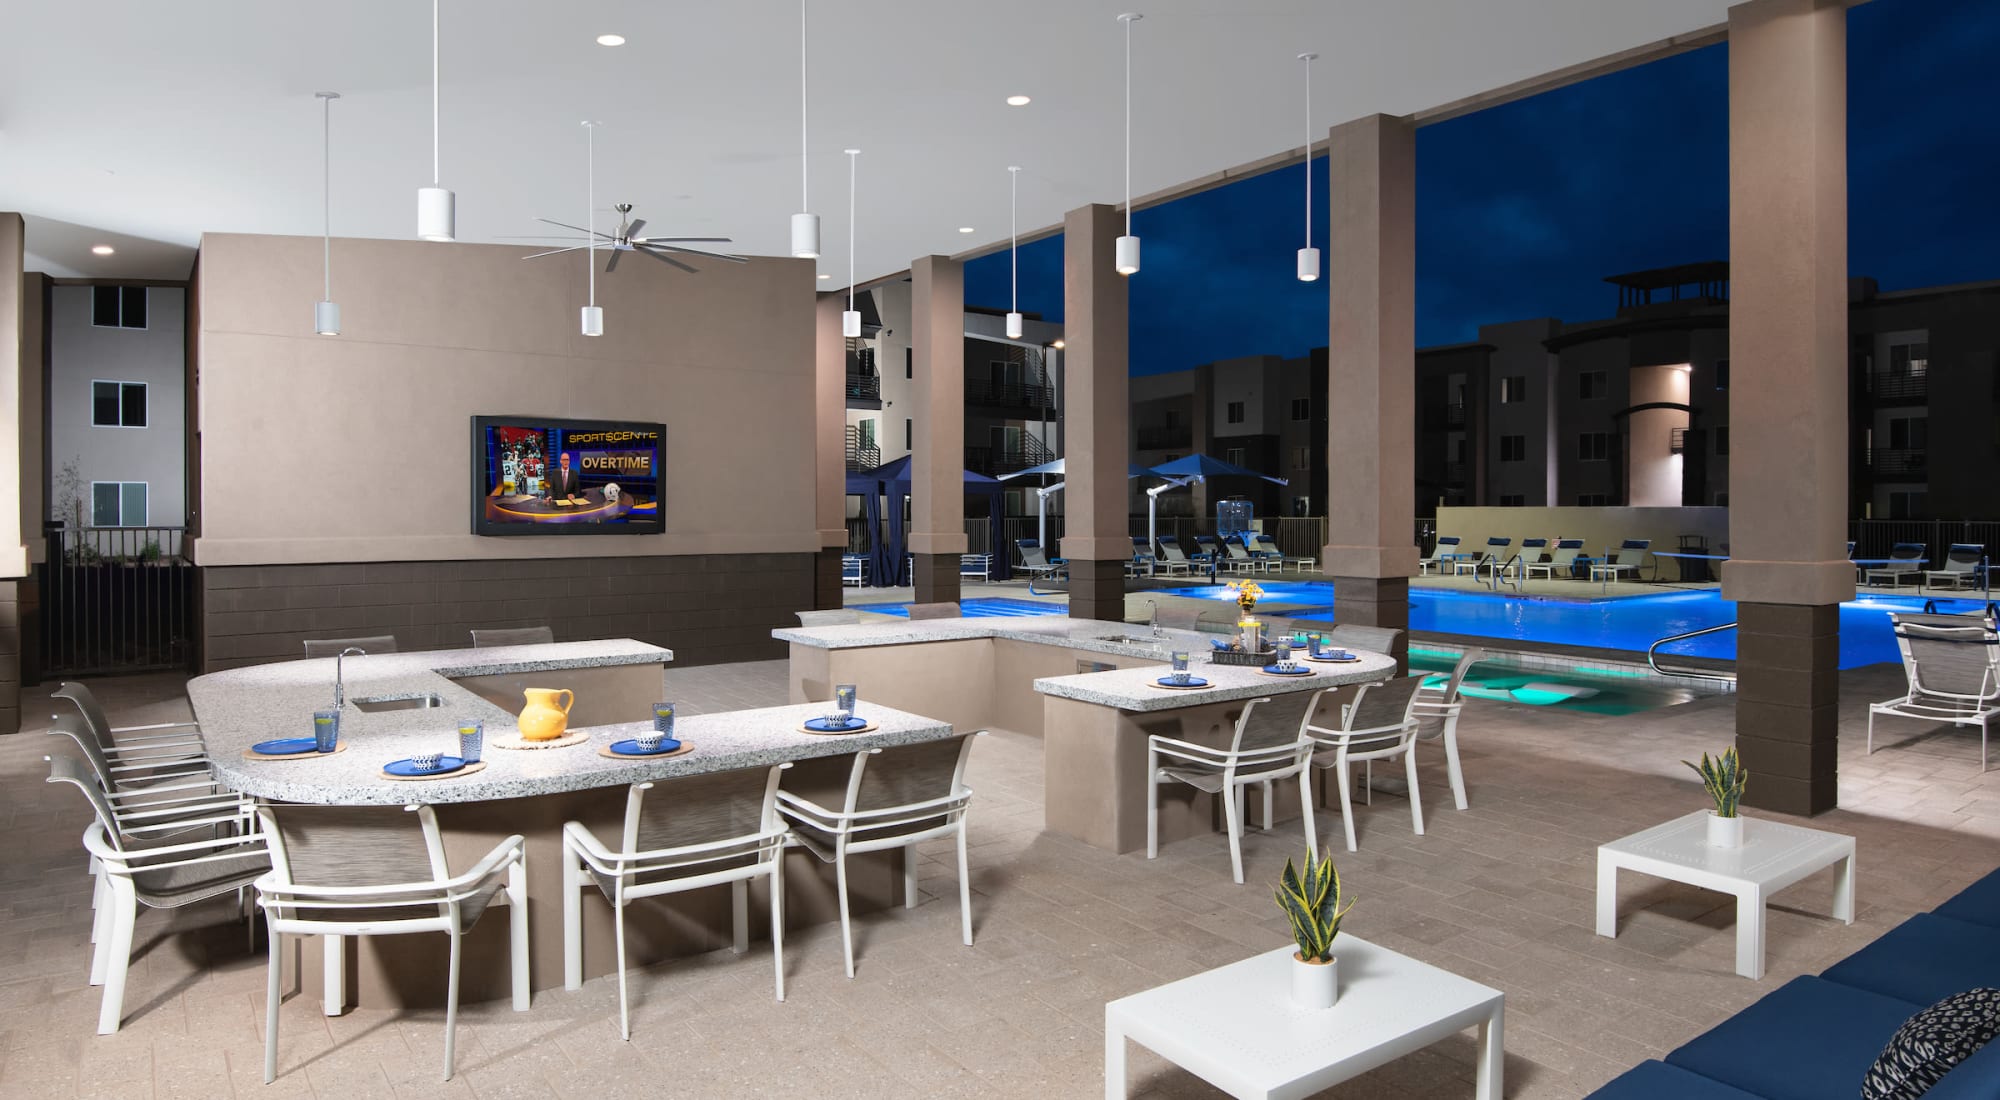 Poolside Ramadas with Gas BBQs, Fireplaces, Wet Bars, and HDTVs at Sky at Chandler Airpark